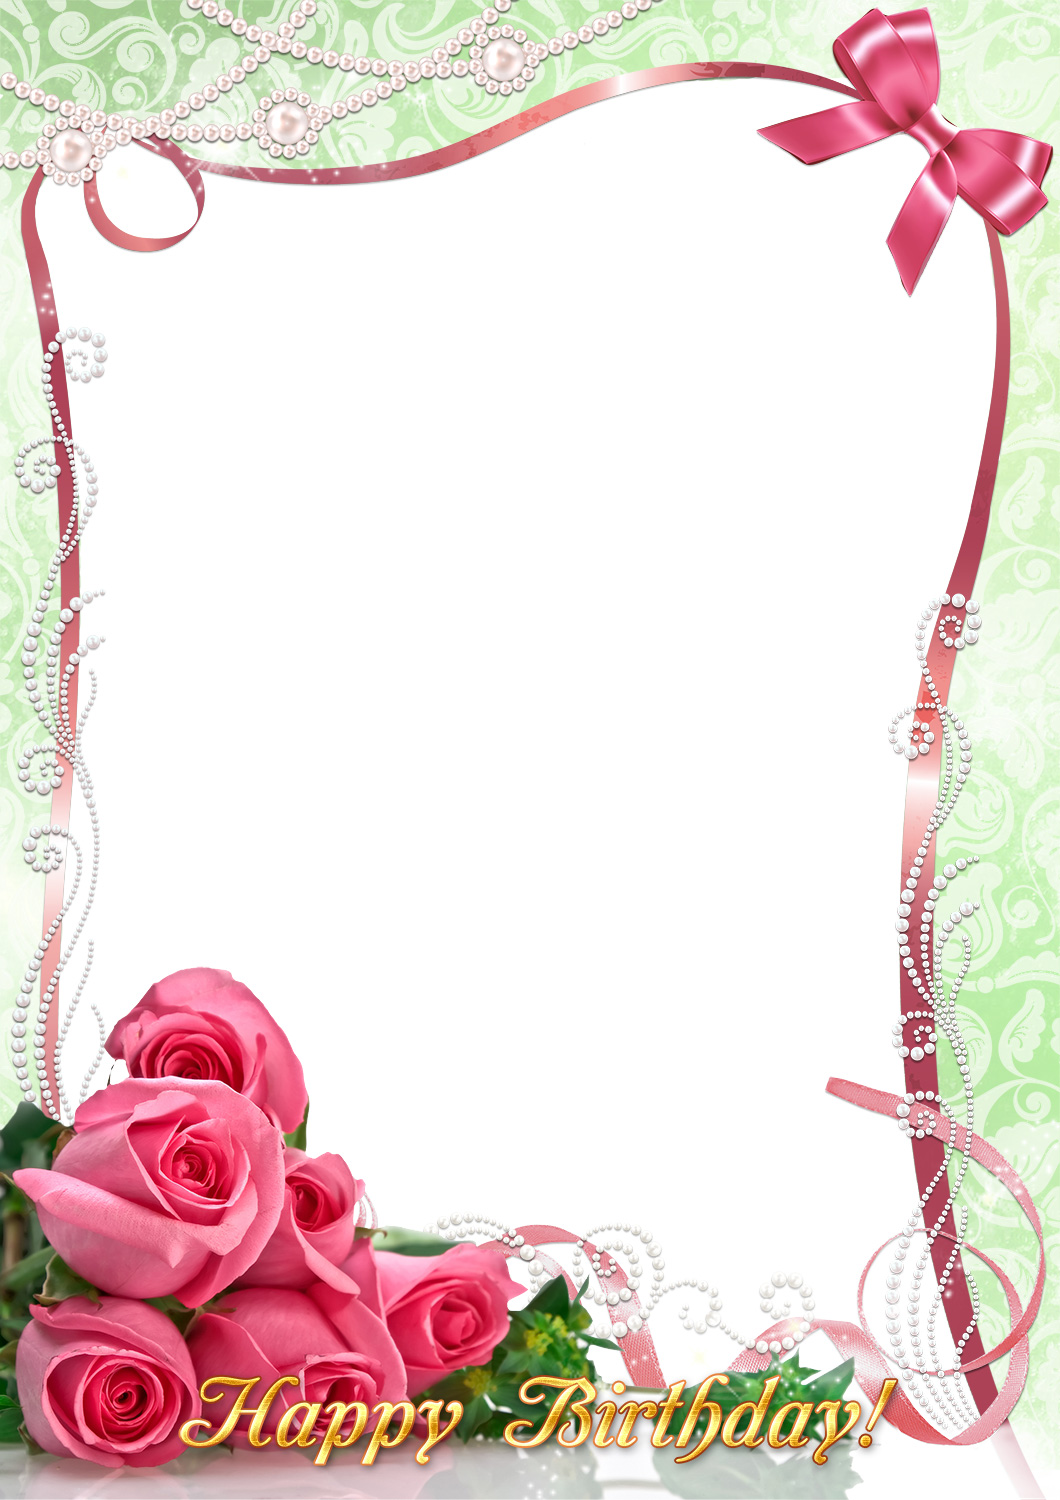 Pink Roses On Your Birthday - Picture Frame - HD Wallpaper 